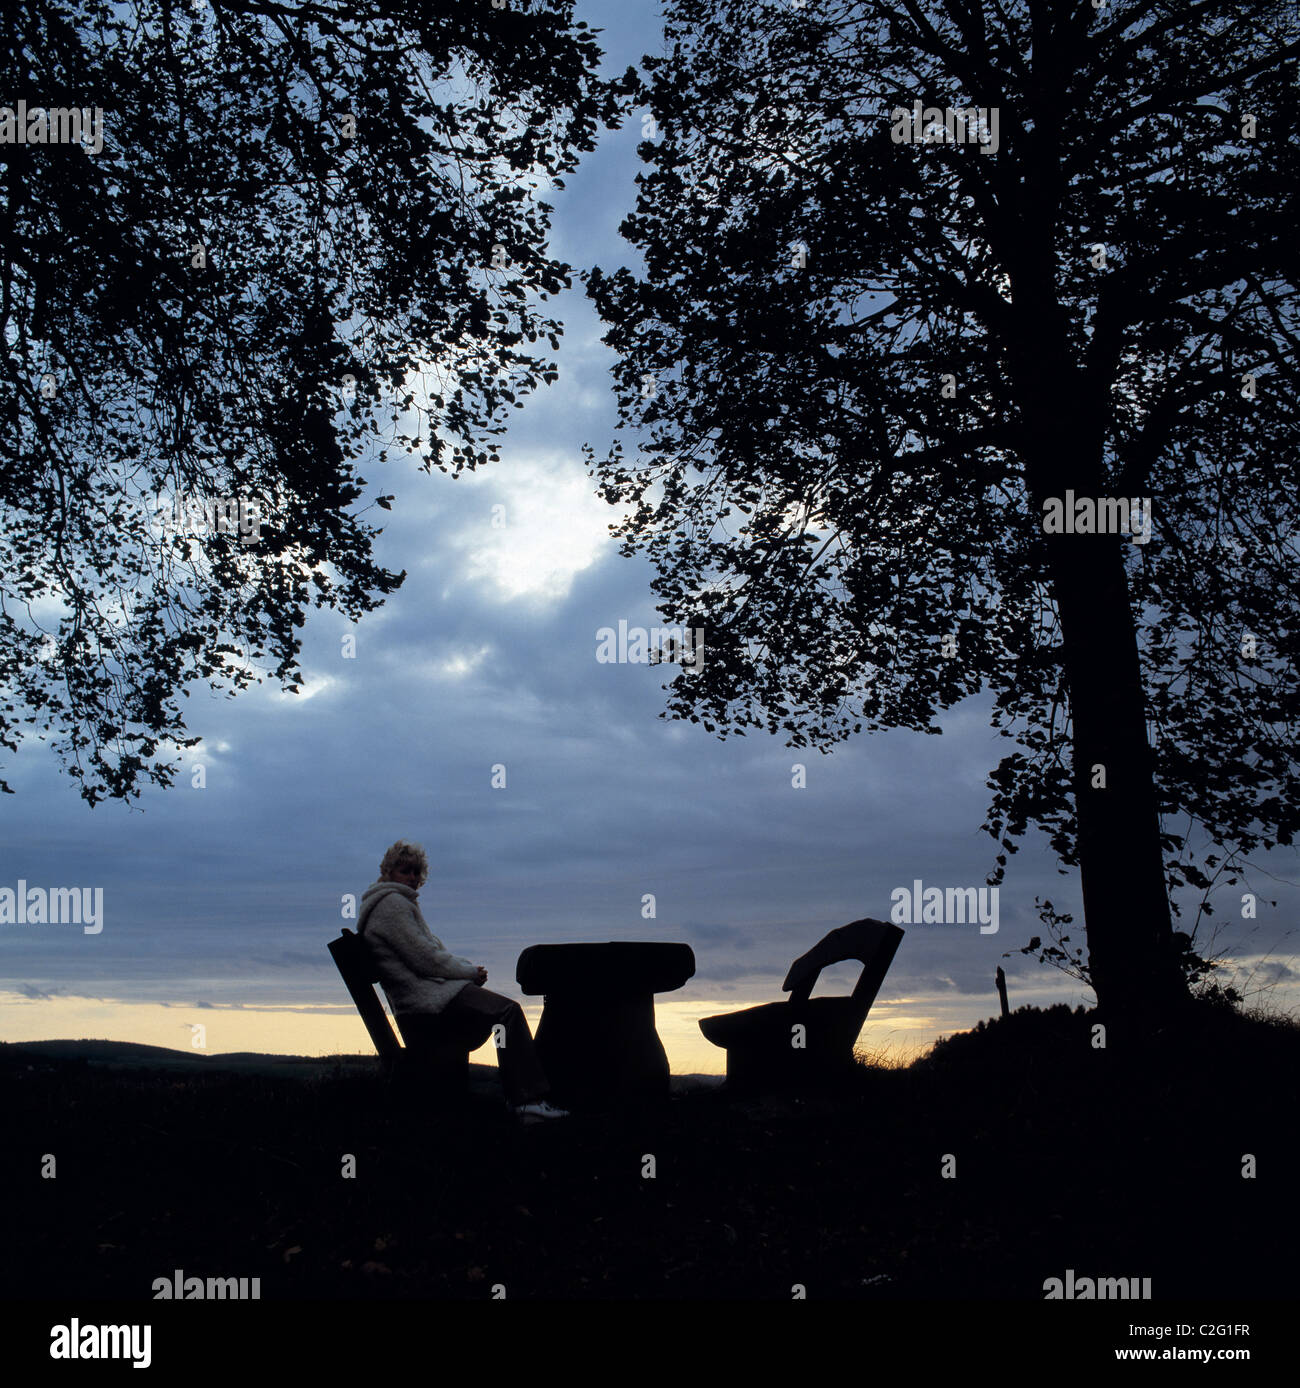 Eighties, symbolism, loneliness, young woman sitting on a bench under a tree, another bench is vacant, vacant seat, table, evening mood, sunset, dark clouds, backlight, silhouette, aged 25 to 35 years, Elizabeth, Bergisches Land, Nordrhein-Westfalen, NRW Stock Photo